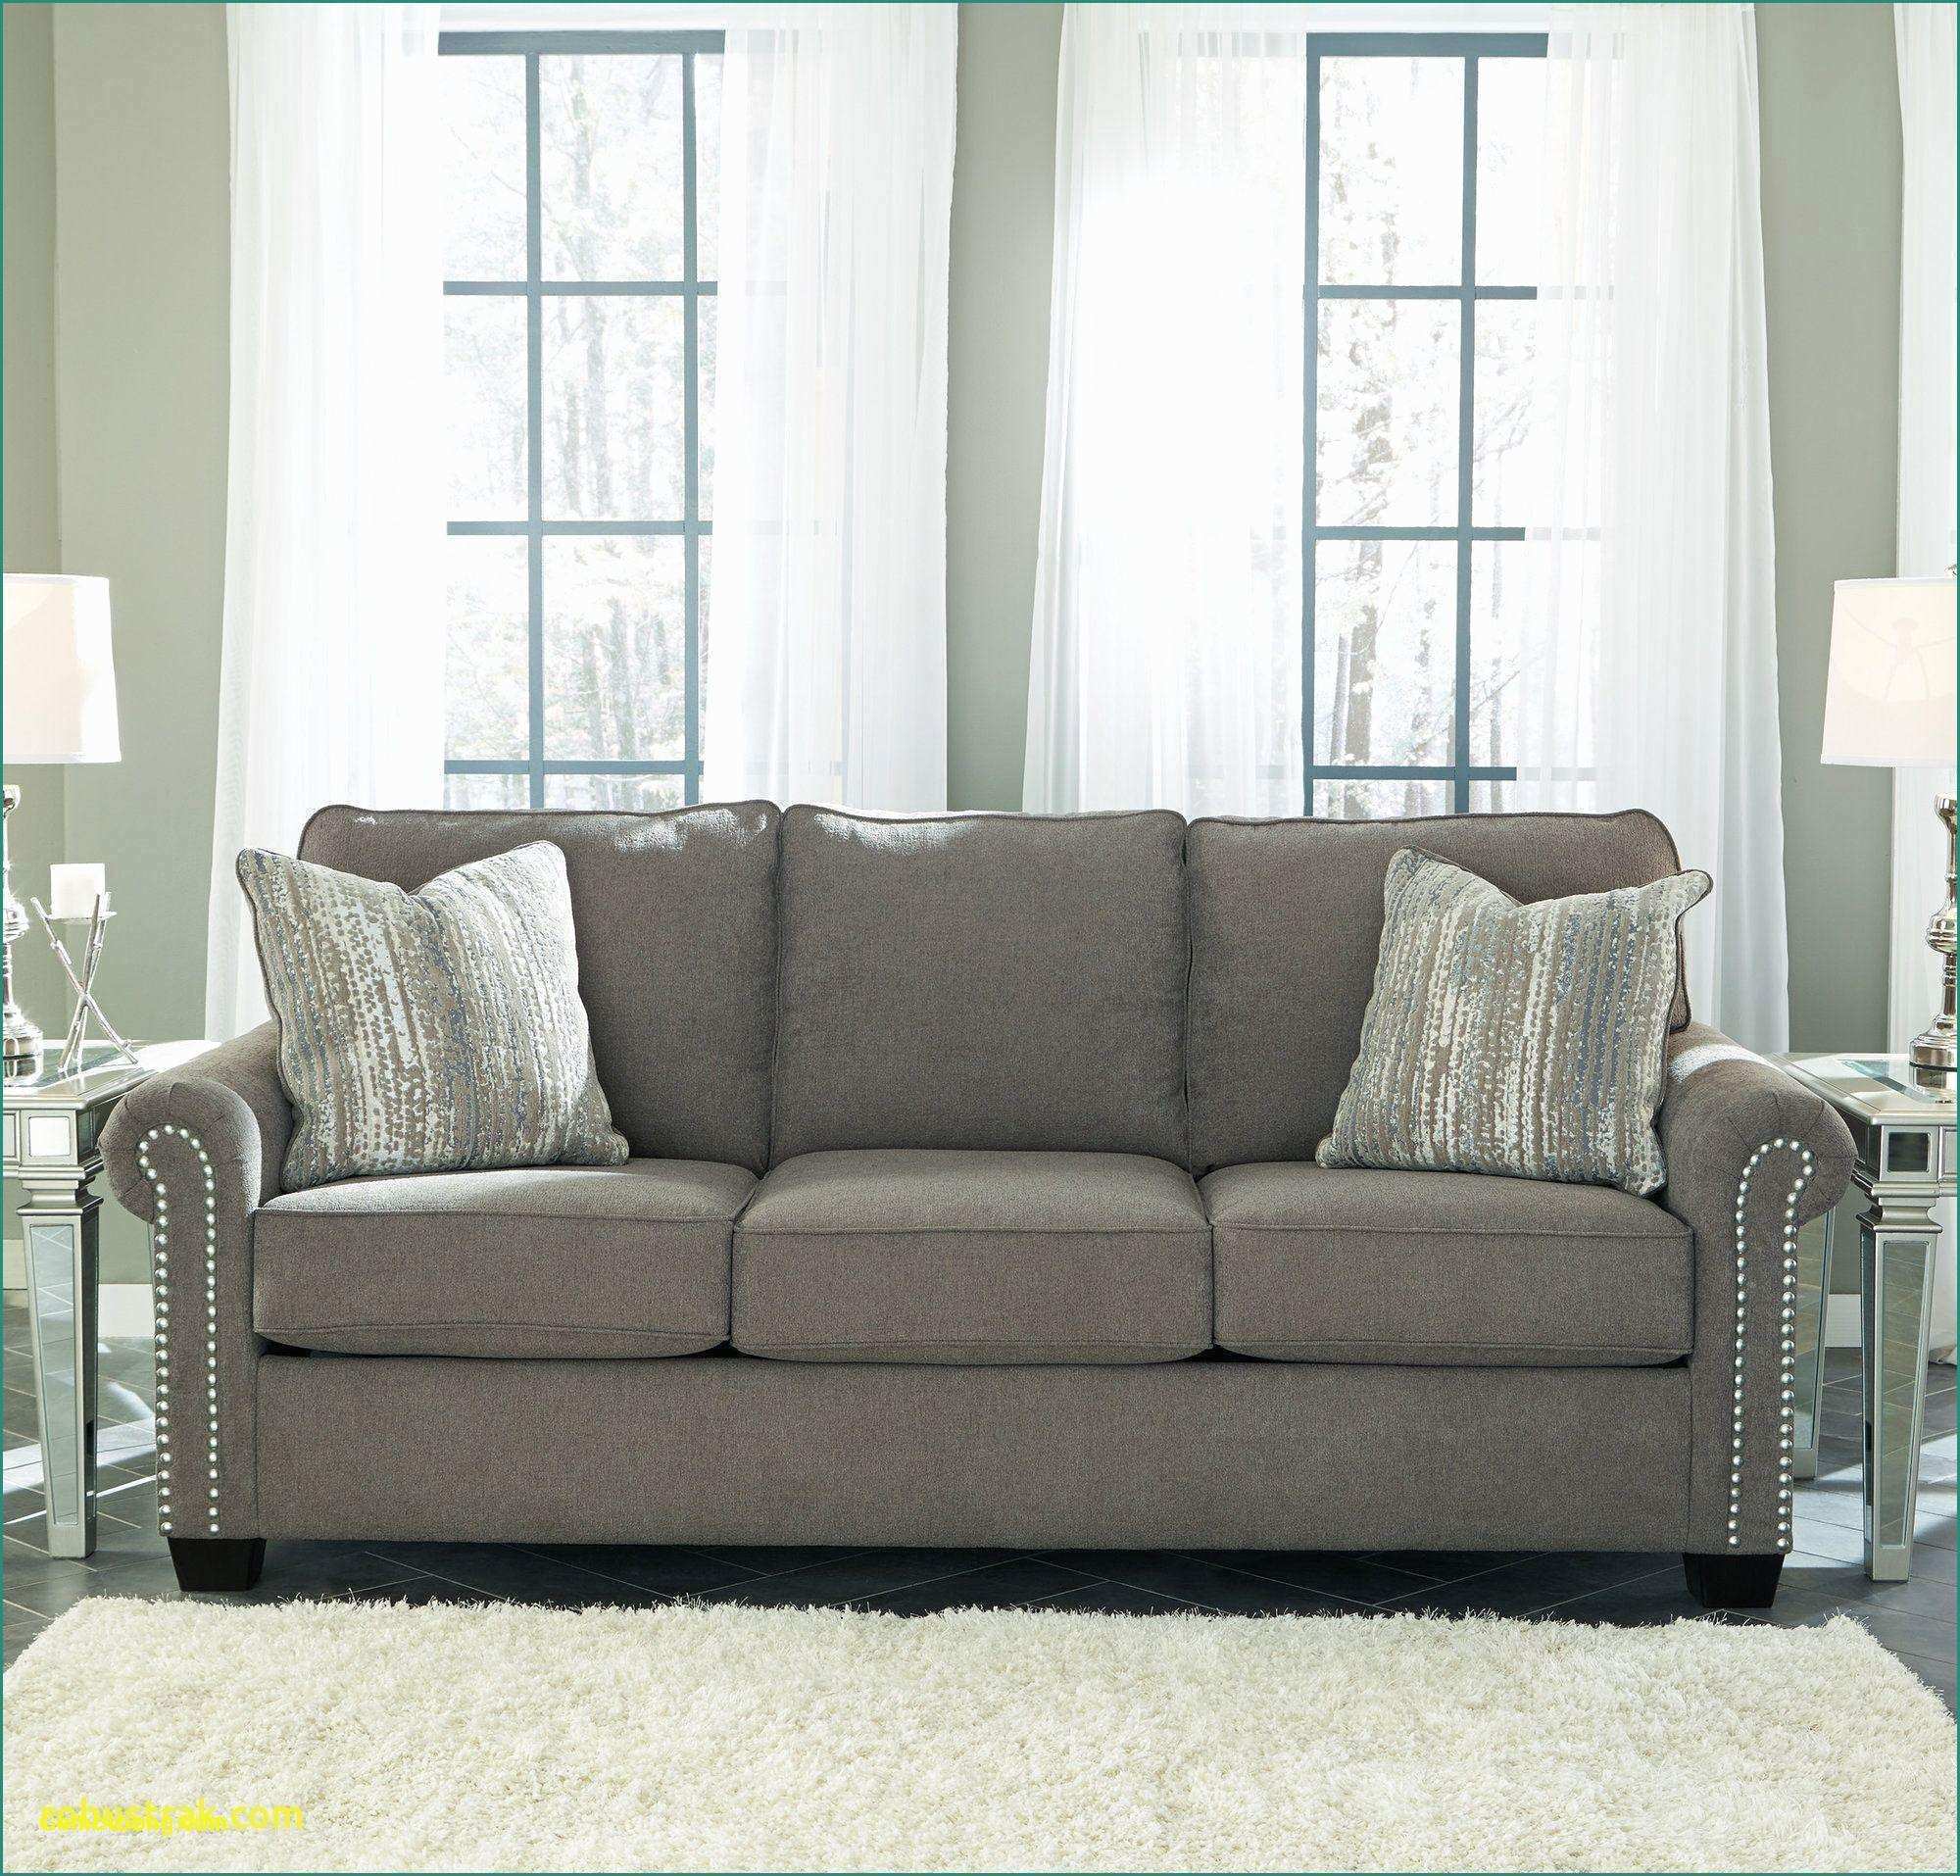 Credenze Moderne Design E Living Room Couch Ideas Incredible L sofa Awesome Hay Couch 0d Best